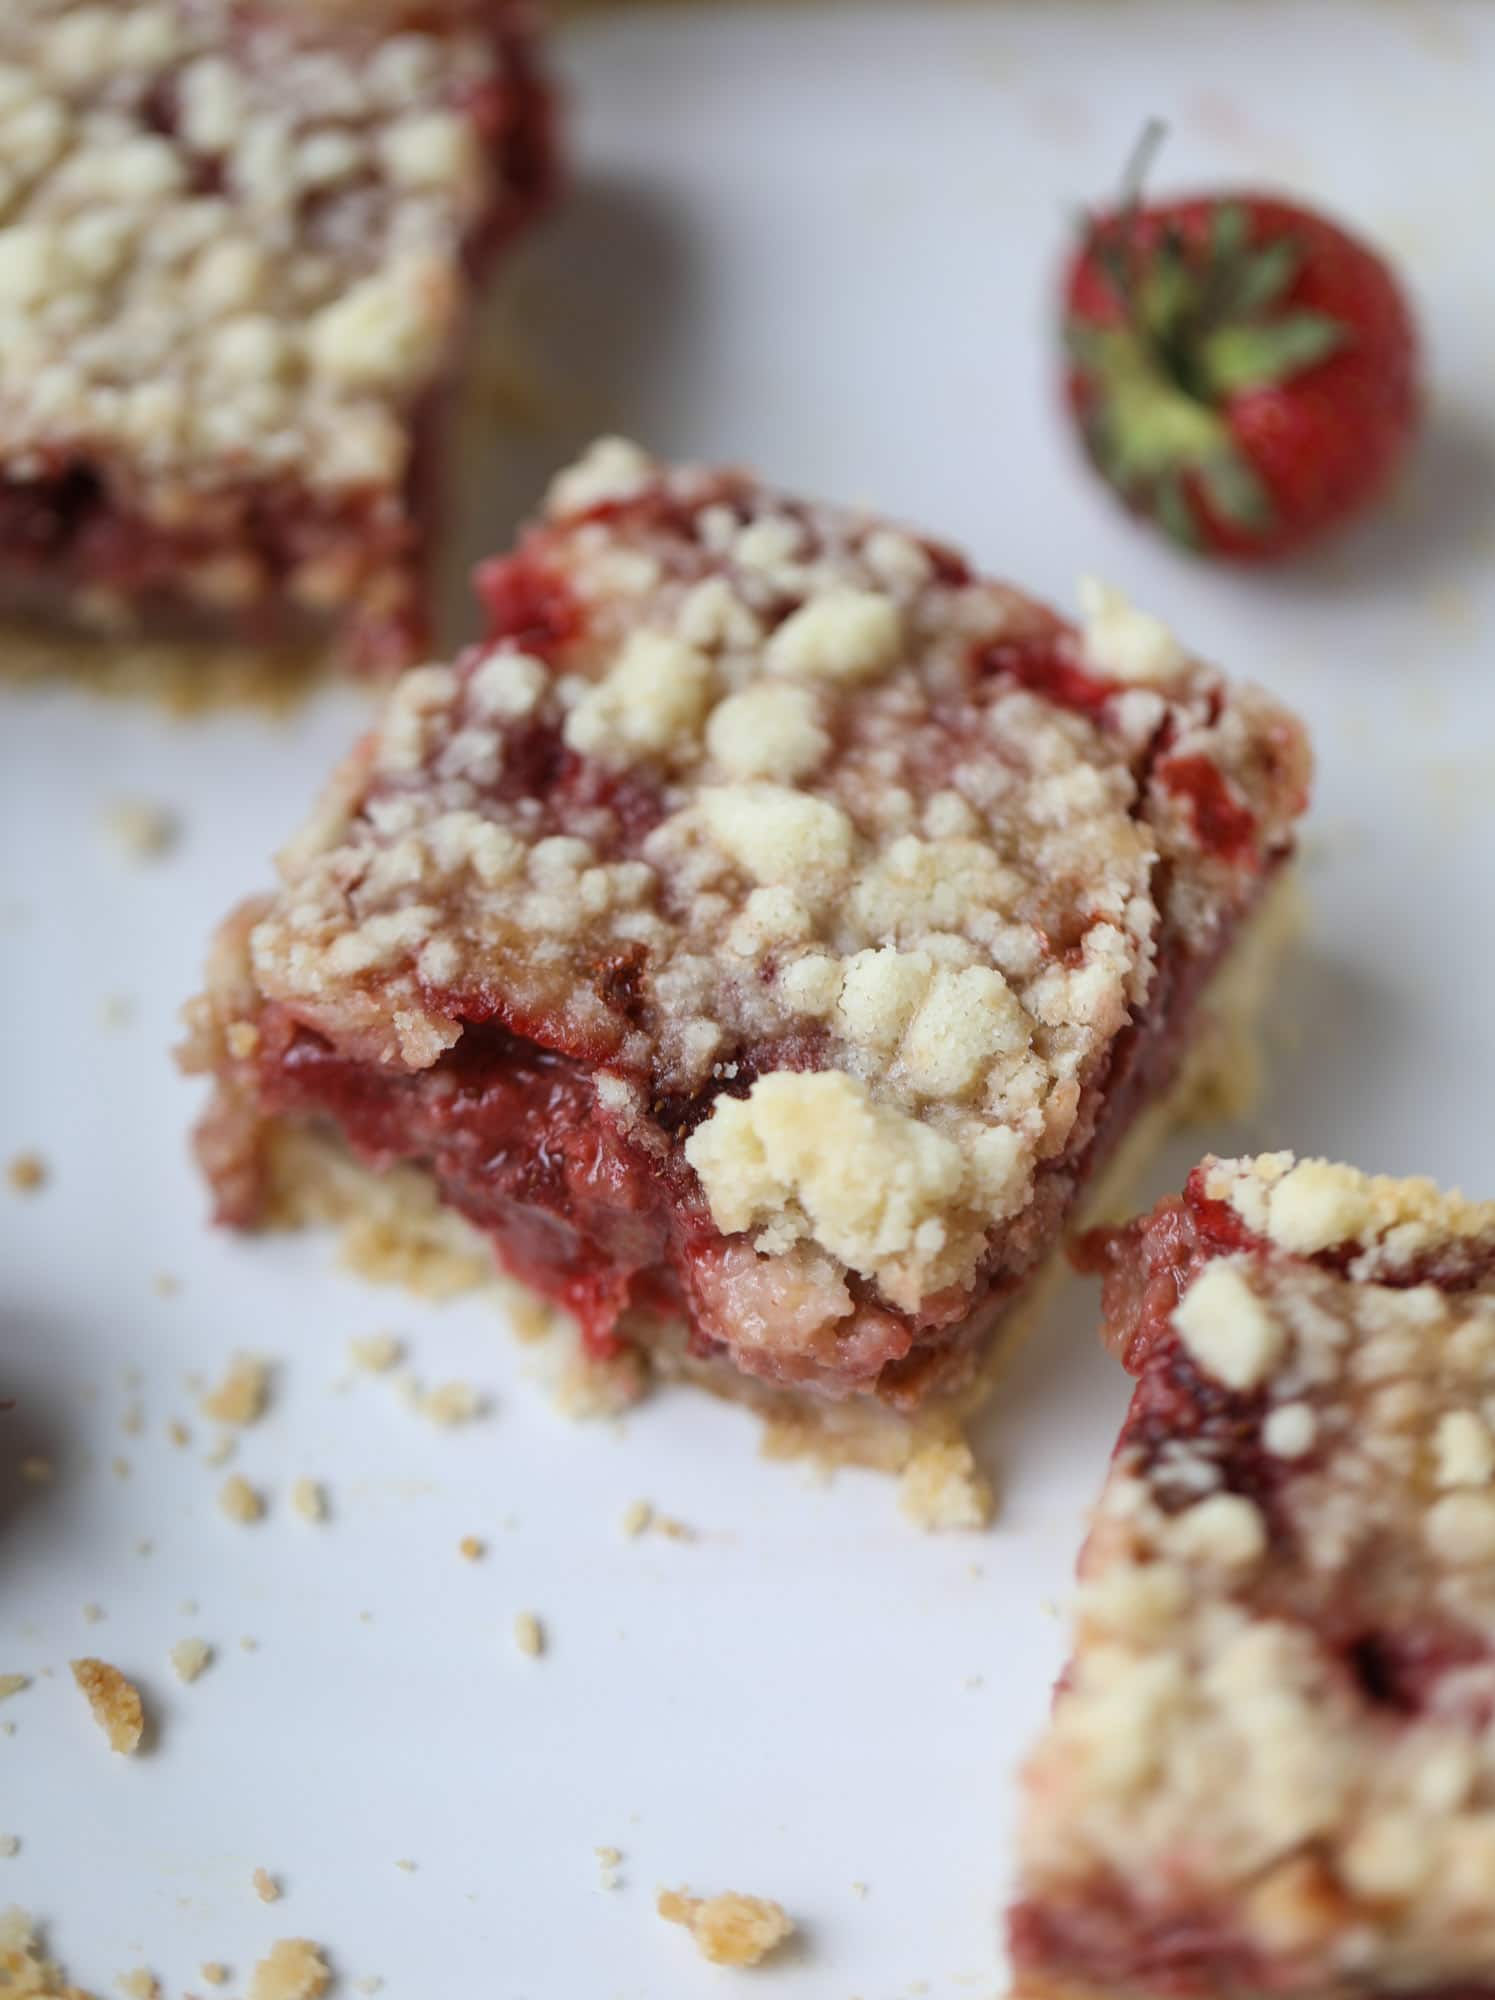 These strawberry cobbler bars are super delicious and perfect for a crowd! Made with juicy fresh strawberries, they start with a shortbread crust and end with a crumbly topping with a warm and delicious fruity filling. Huge hit! I howsweeteats.com #strawberry #cobbler #bars